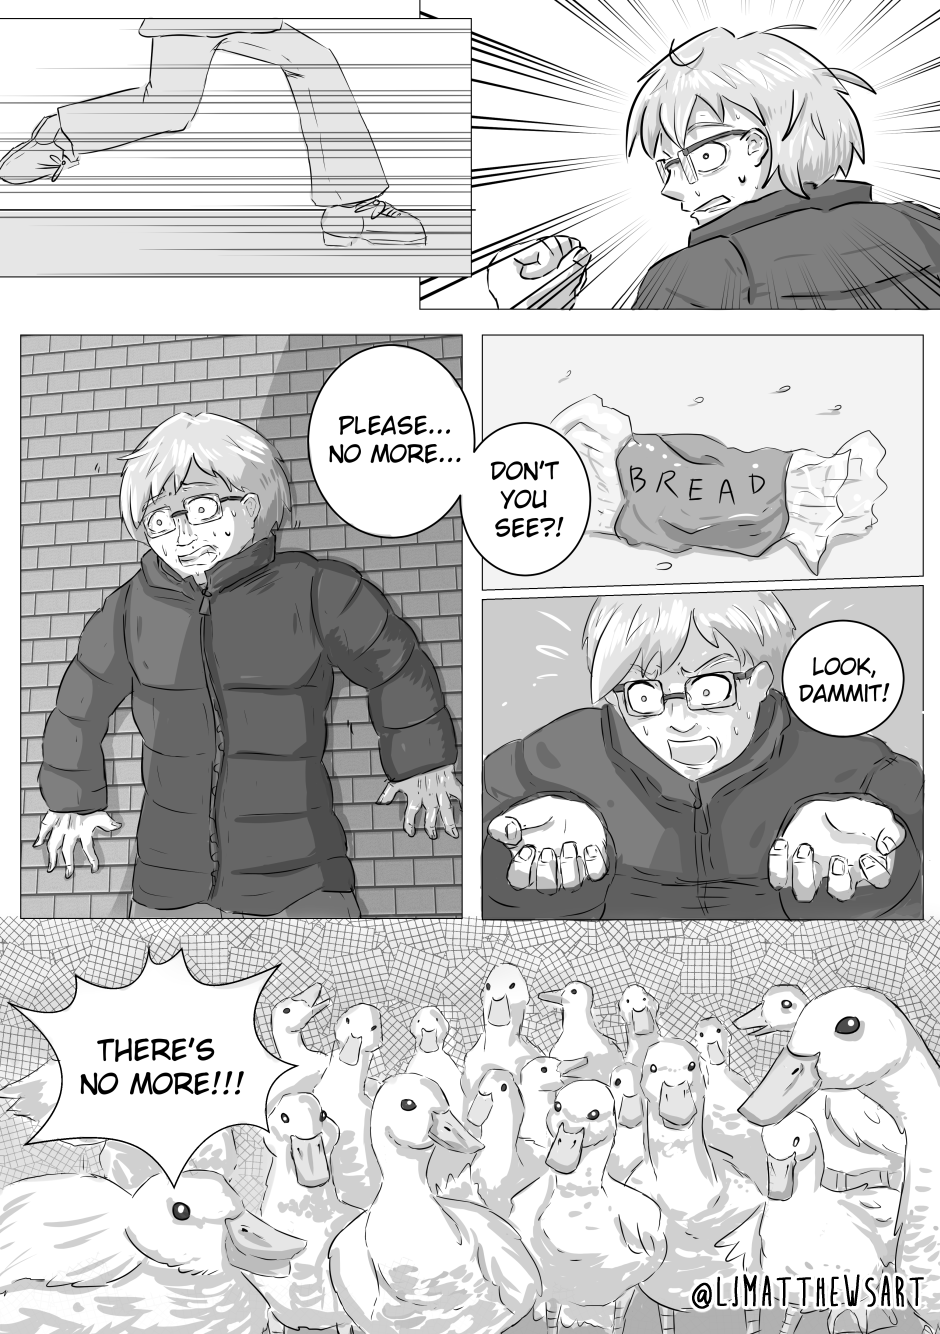 A comic of a man being terrorised by hungry ducks.